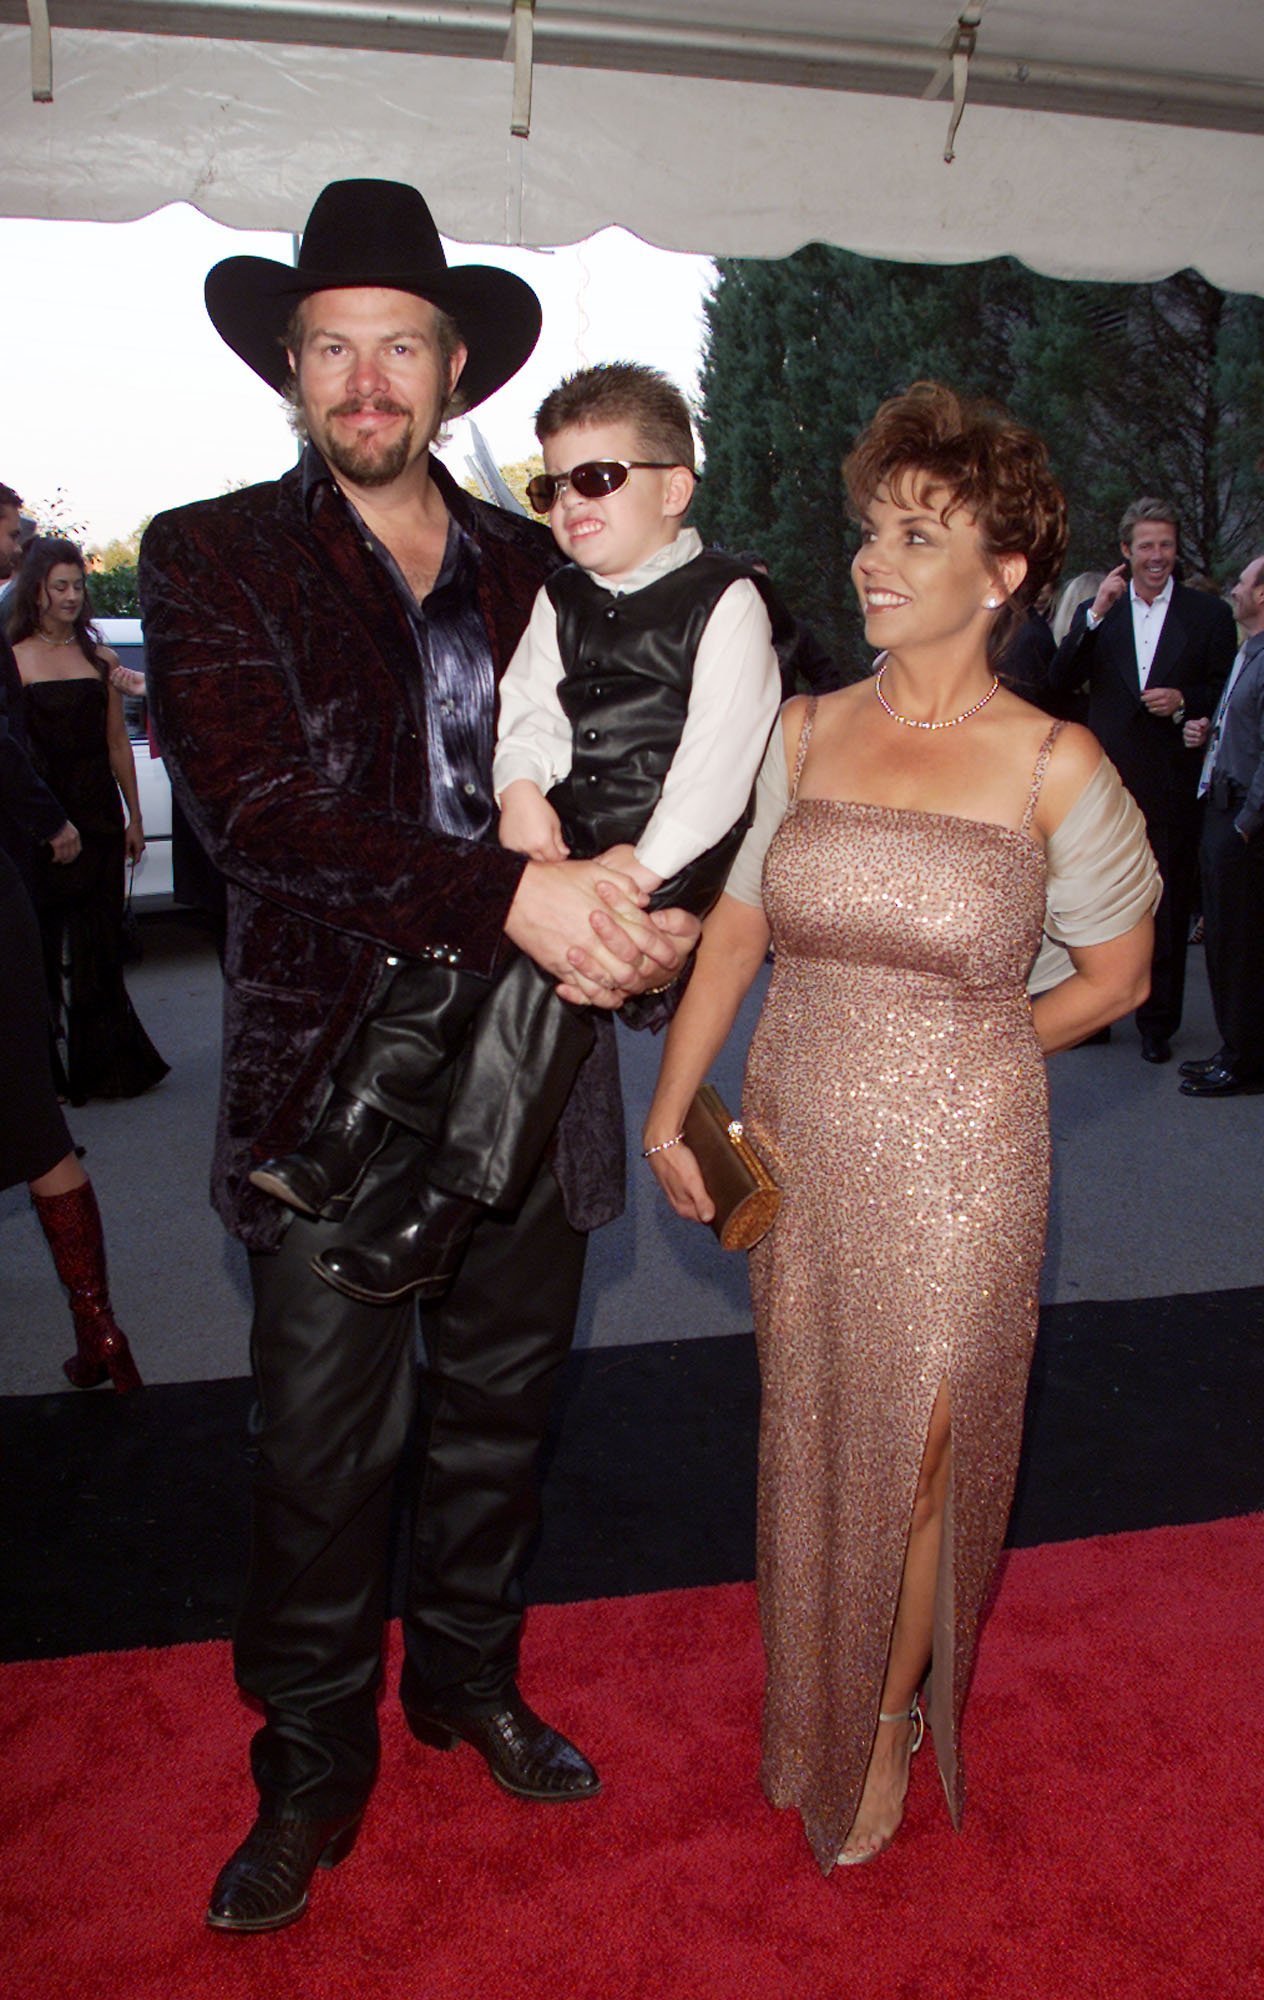 Toby Keith with wife Tricia and their son arrive for the 34th Annual CMA Awards at the Grand Old Opry in Nashville, Tennessee, on October 04, 2000 | Source: Getty Images